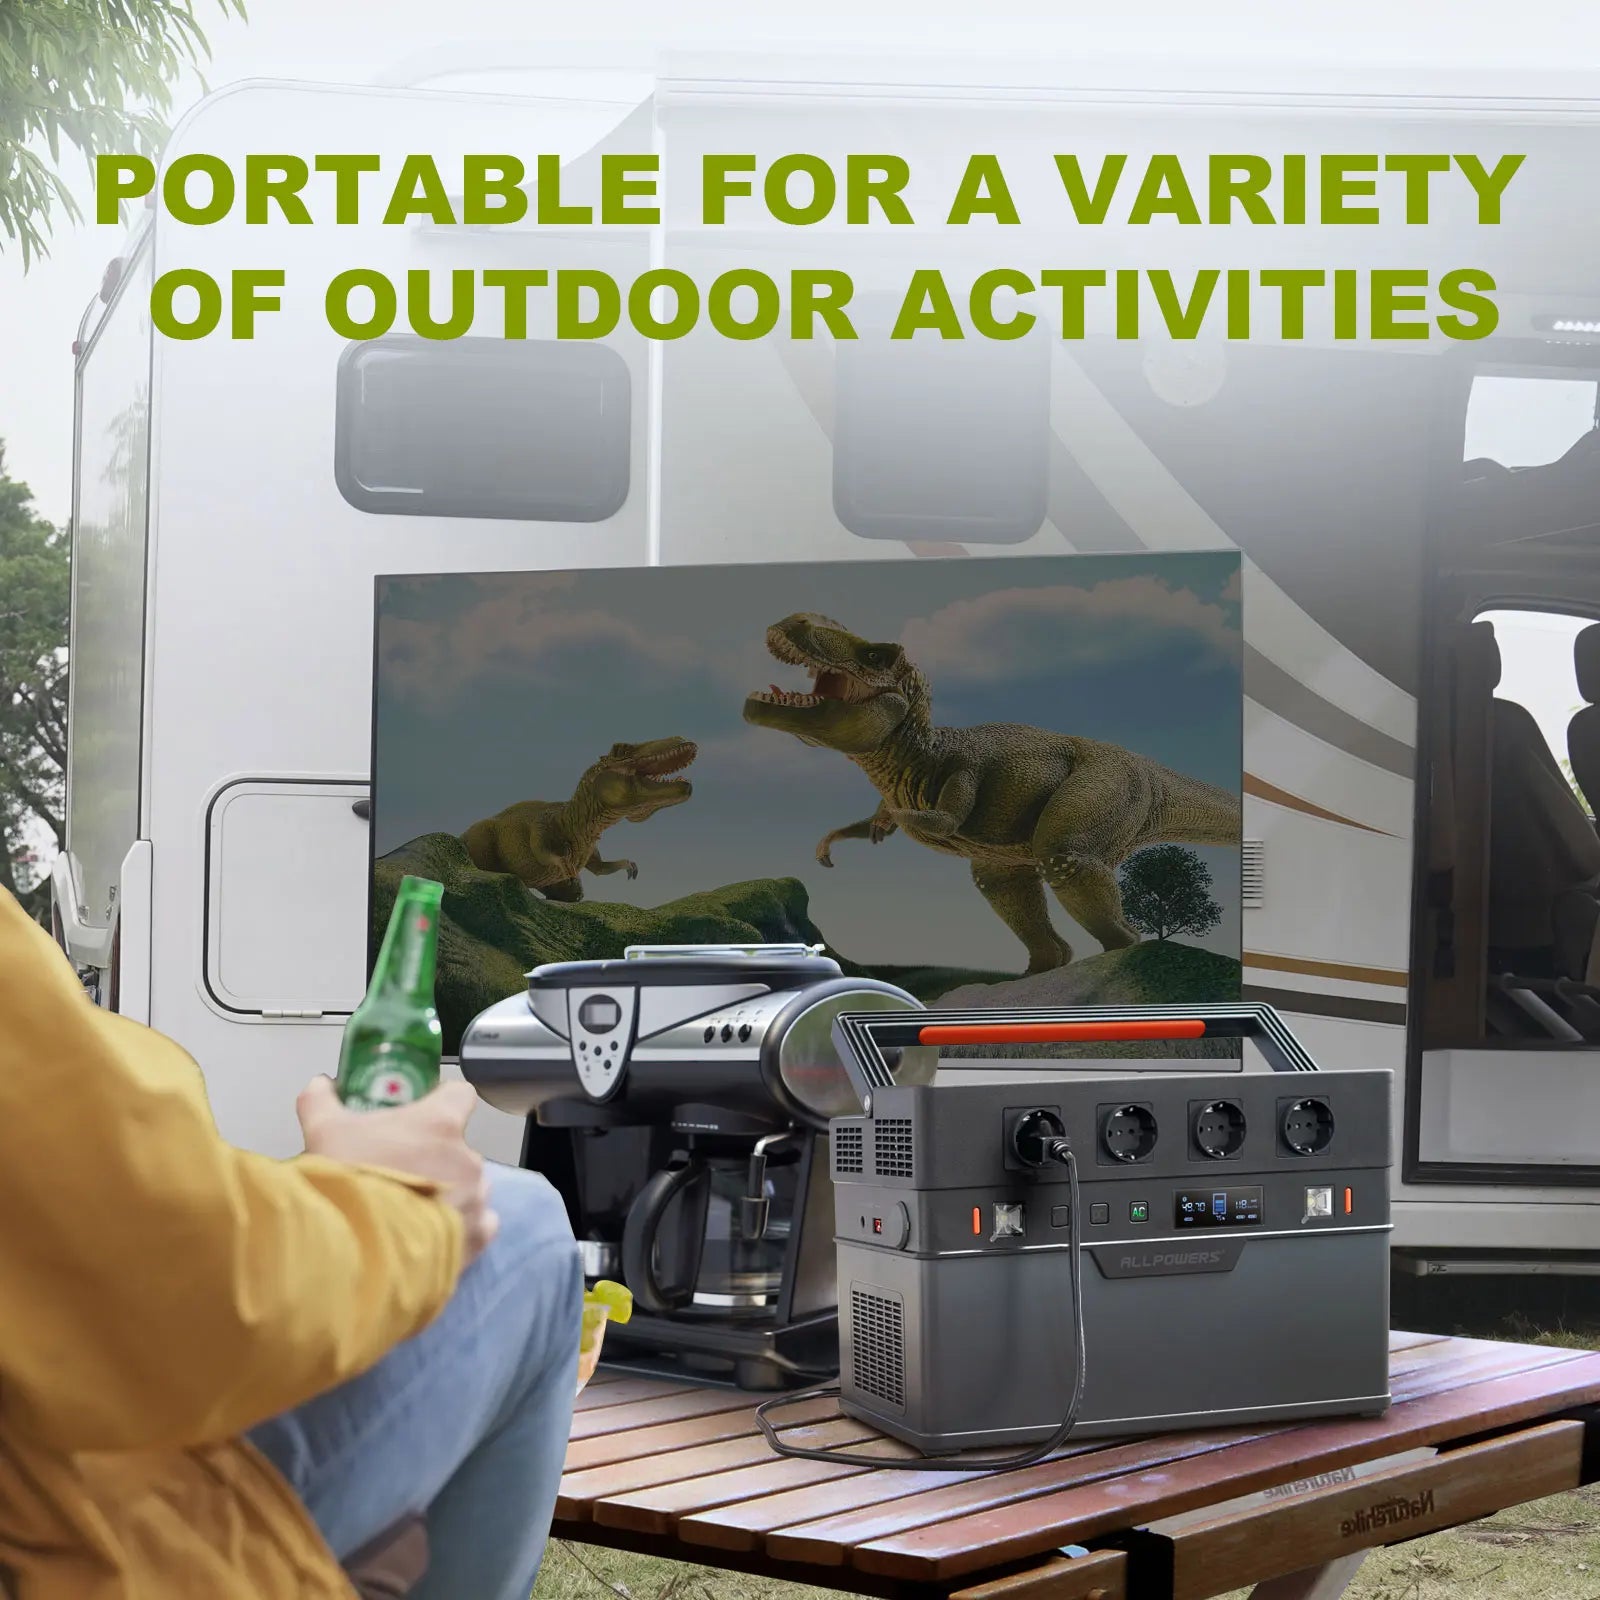 AllPowers Portable Generator is perfect for various outdoor activities, including camping and caravanning.